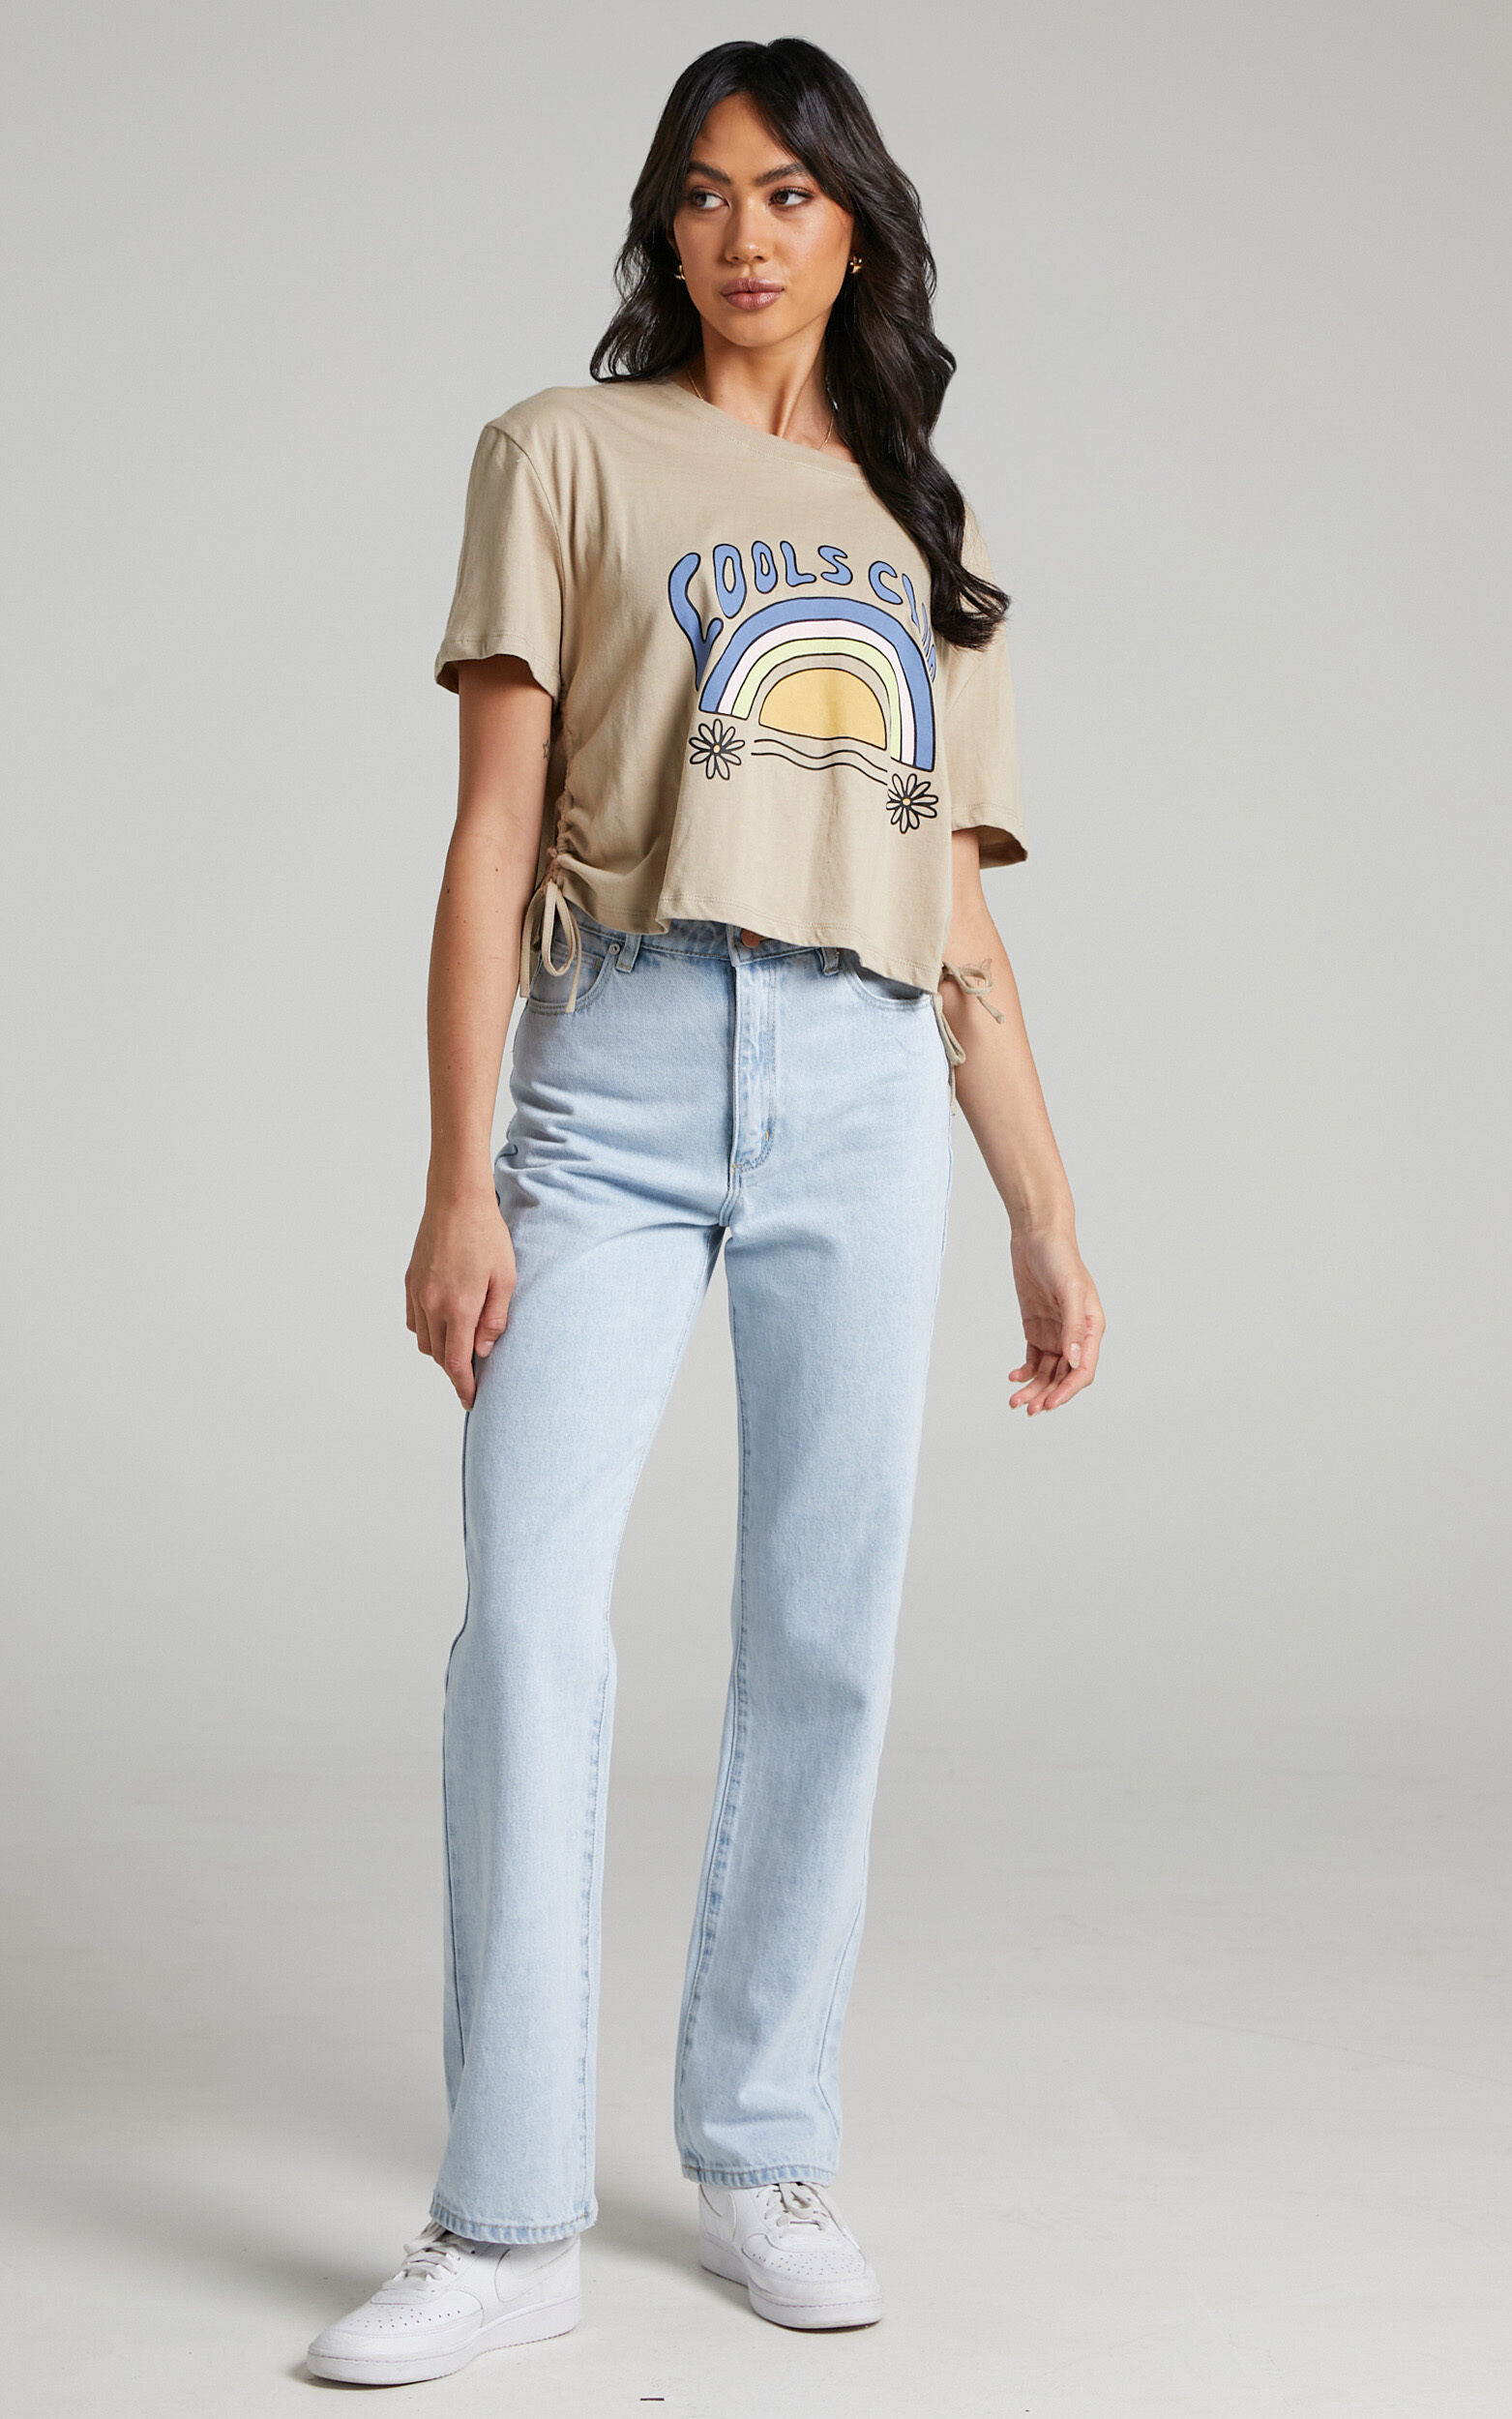 COOLS CLUB -70's Cropped Club Tee in Pigment Cashew - 06, CRE1, super-hi-res image number null